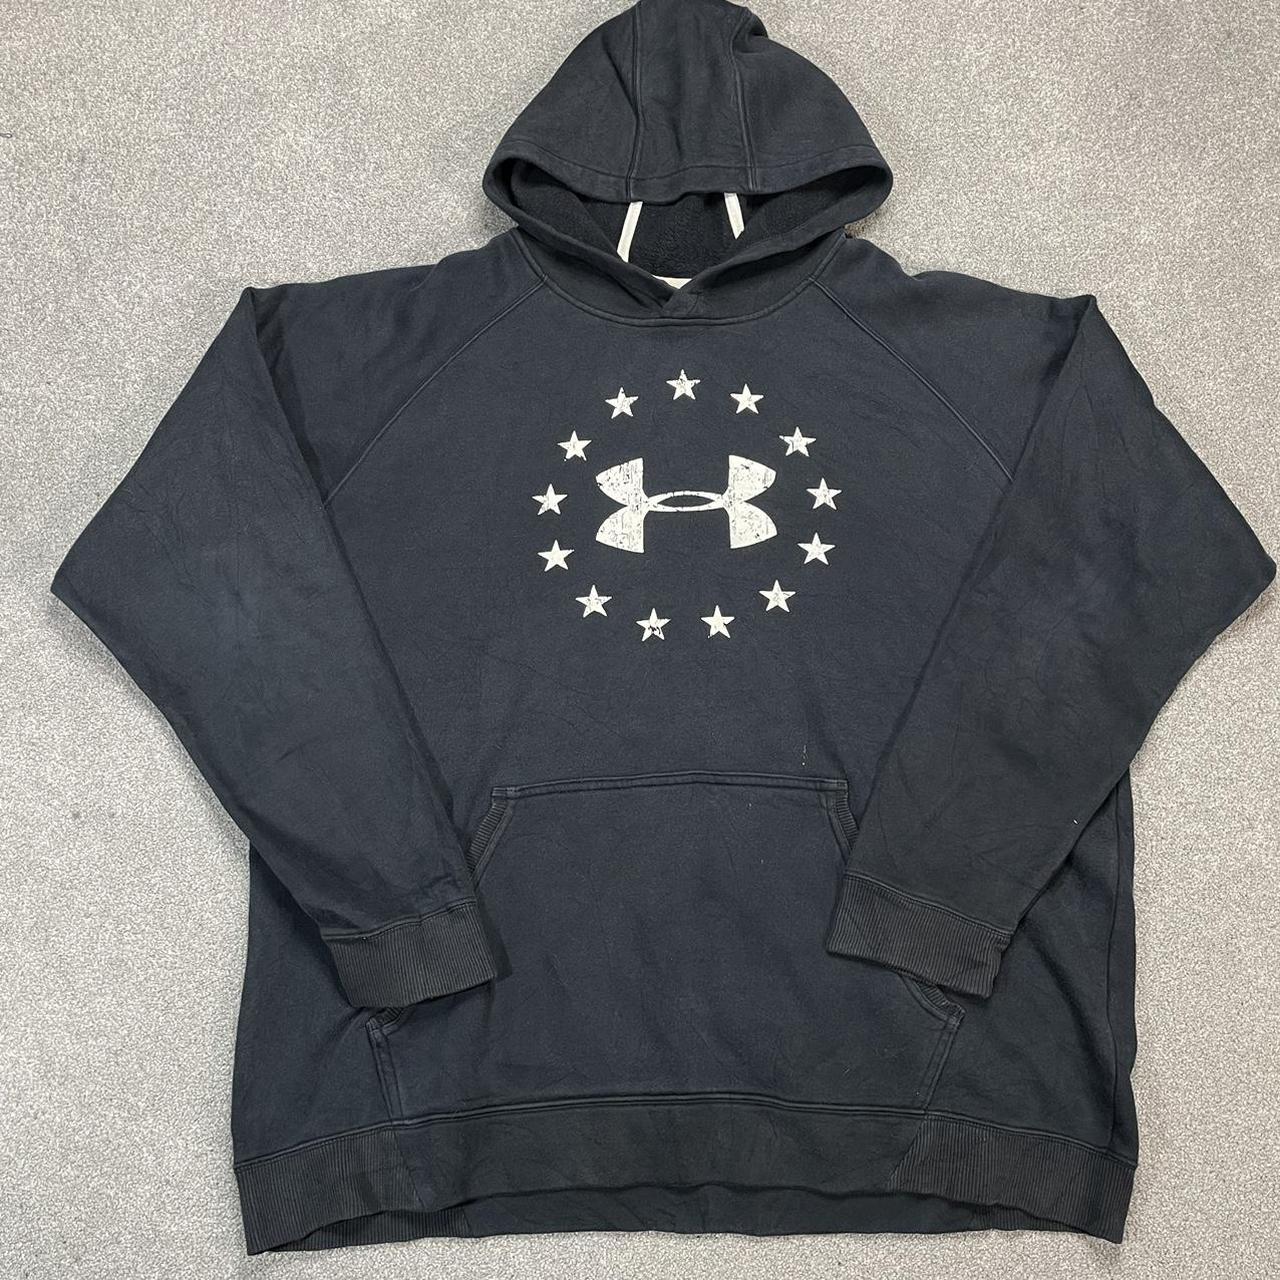 Under Armour Sweatshirts for Women Size L, Jumpers